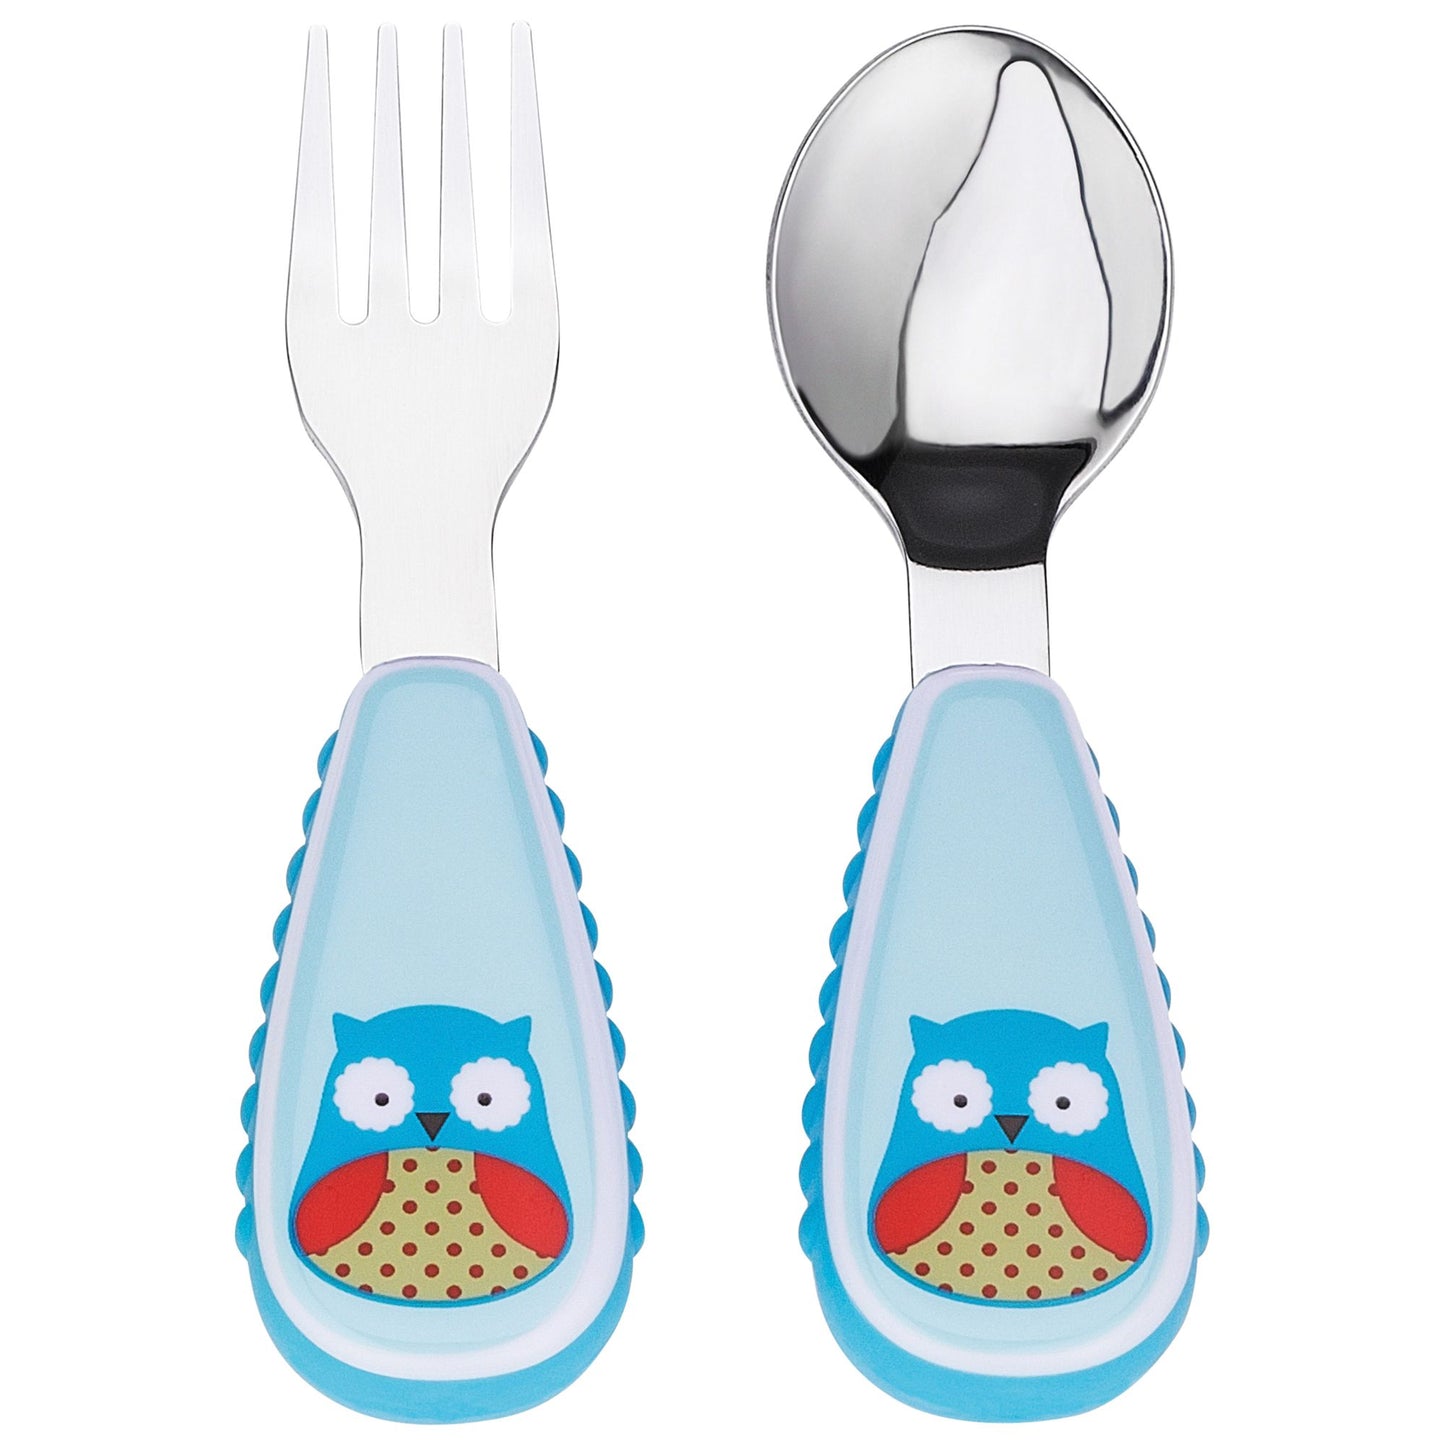 Happy Dragon - Little Hands Spoon and Fork (4550224904226)